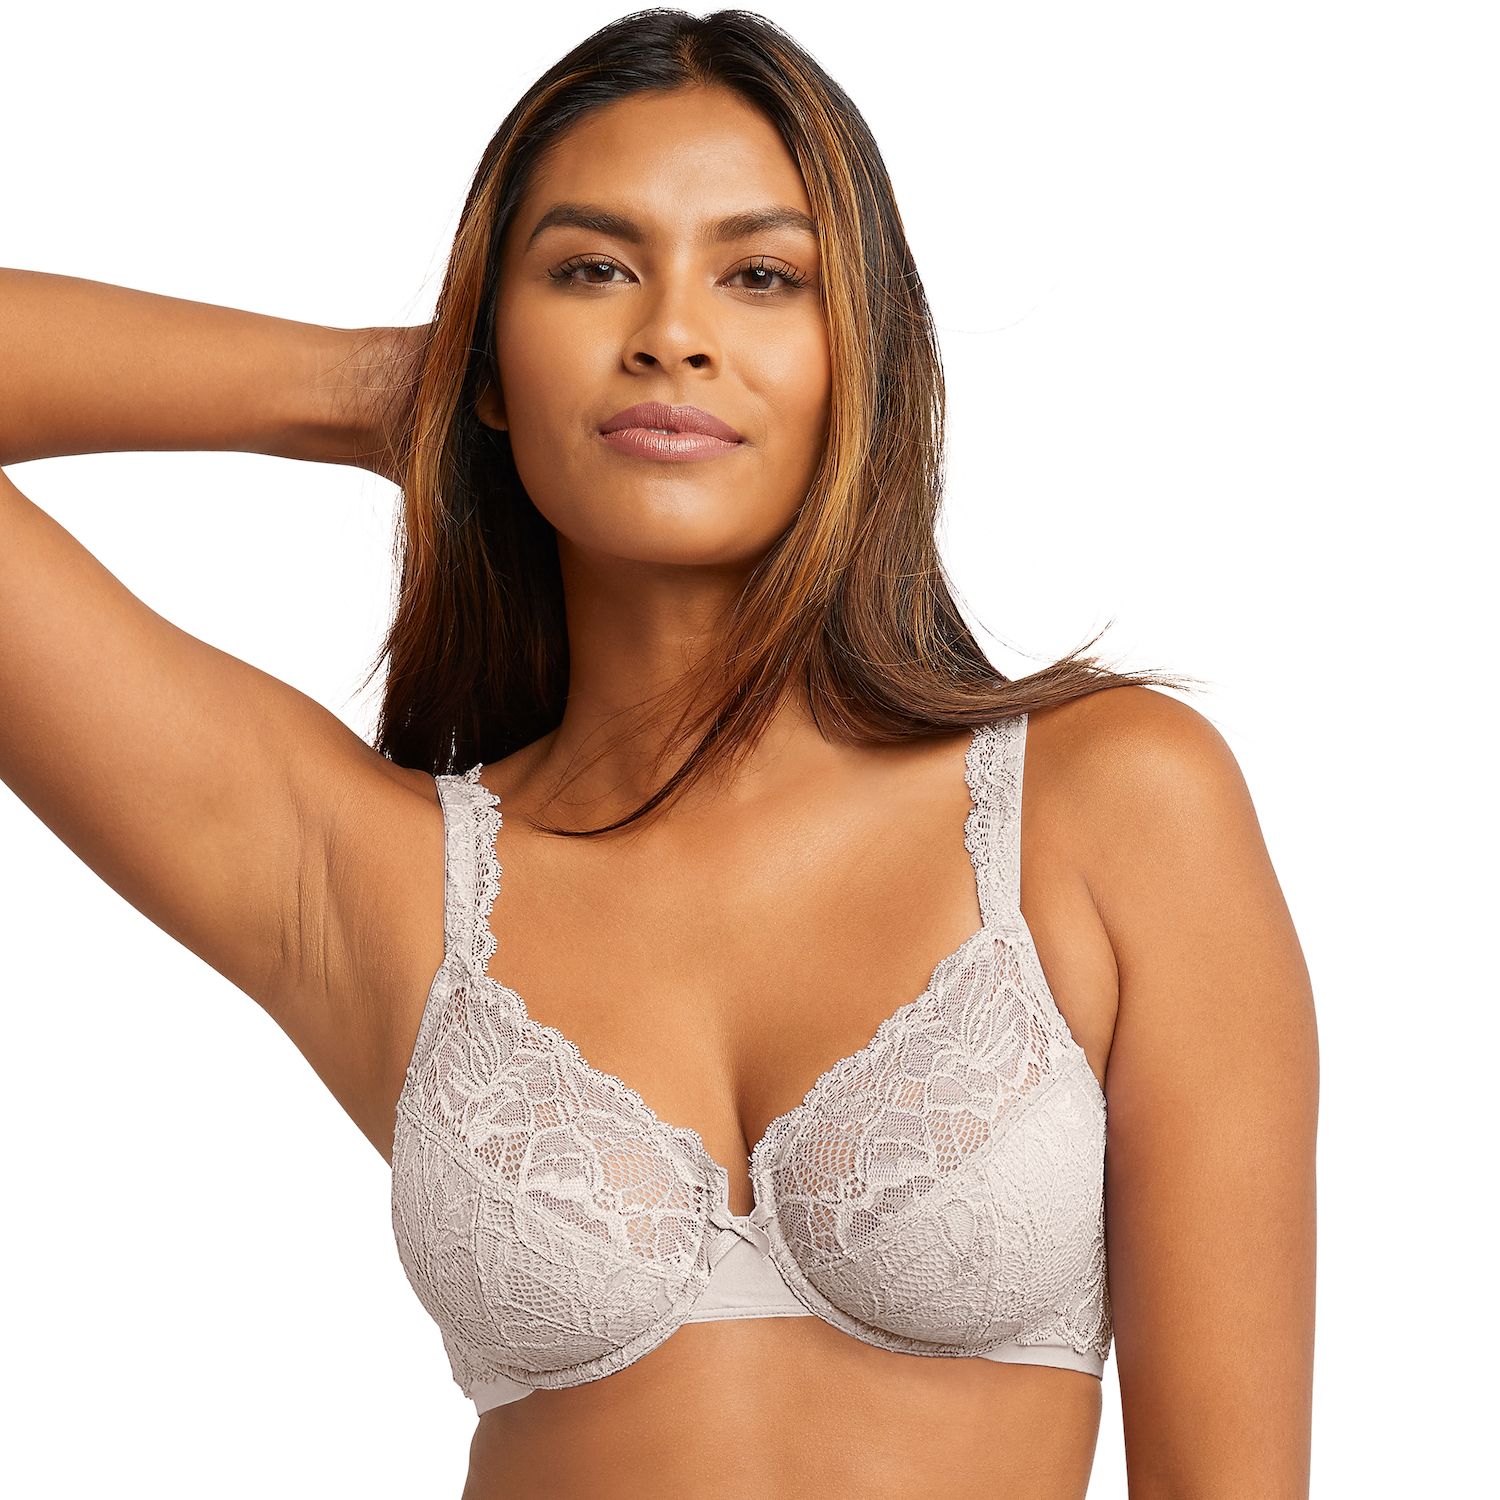 Top 5 Intimates Styles for Refreshing Your Top Drawer